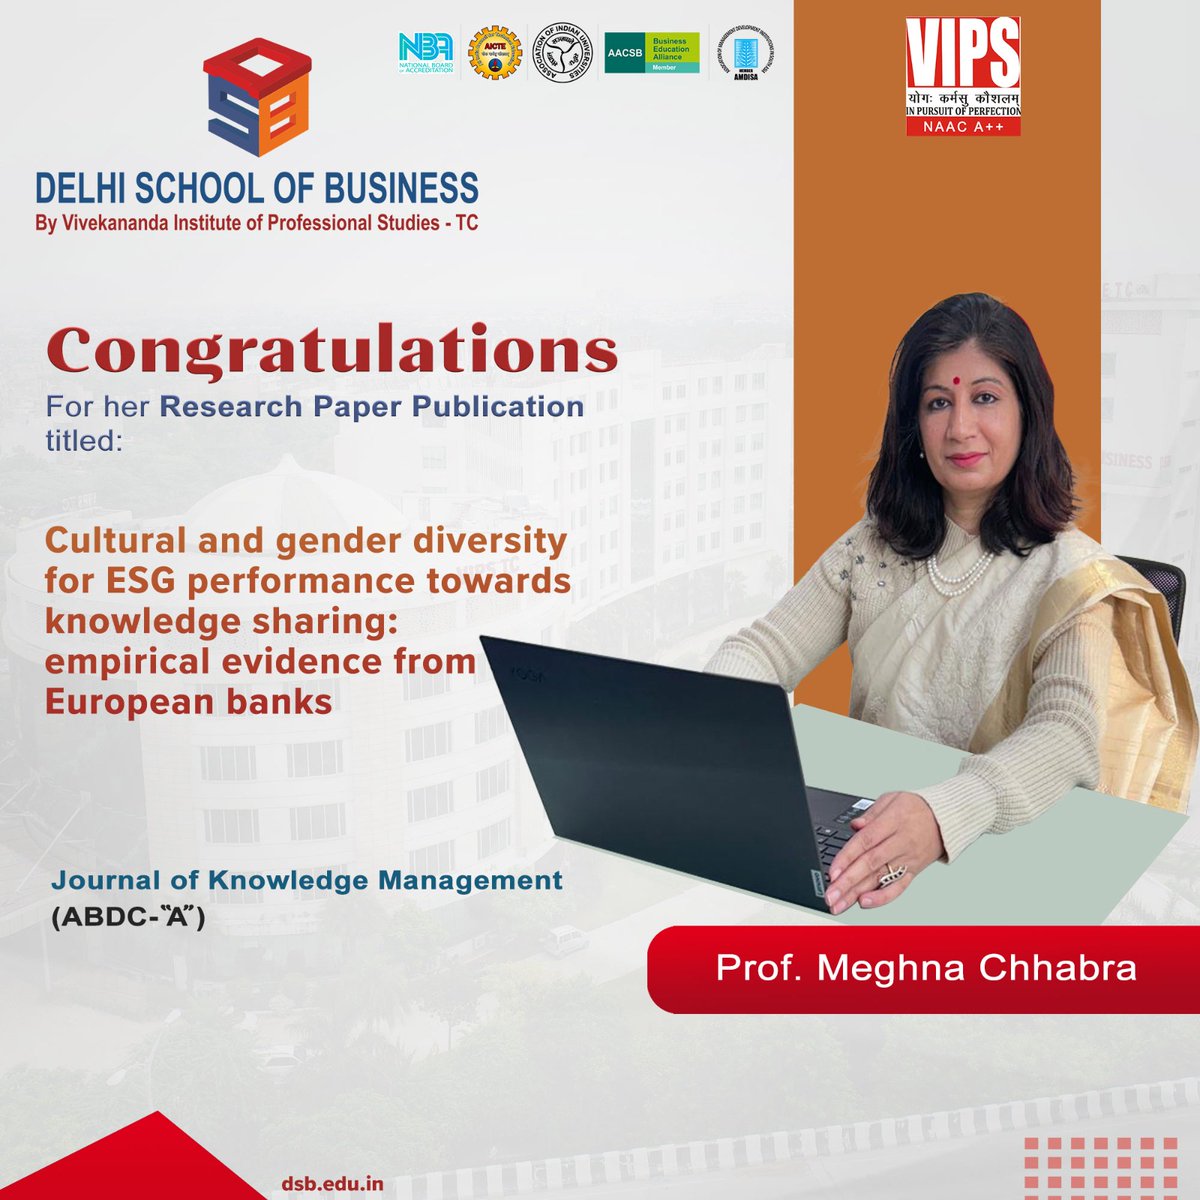 Congratulations to Prof. Meghna Chhabra for her successful research paper publication titled 'Cultural & Gender Diversity for ESG Performance Towards Knowledge Sharing: Empirical Evidence from European Banks' in the Journal of Knowledge Management. #DSBResearch #Blockchain #MBA